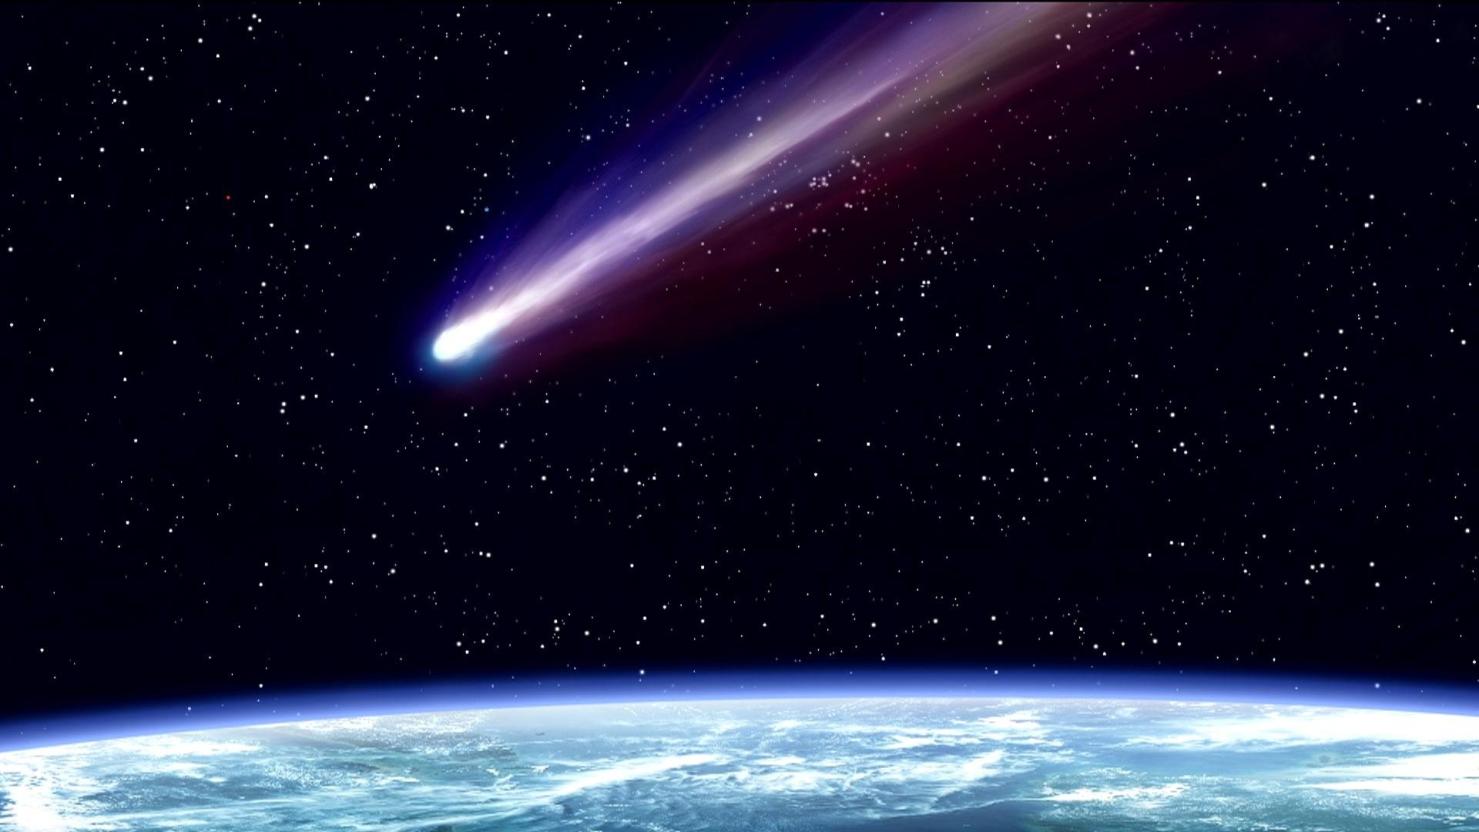 What Are the Latest Discoveries and Research on Comets?